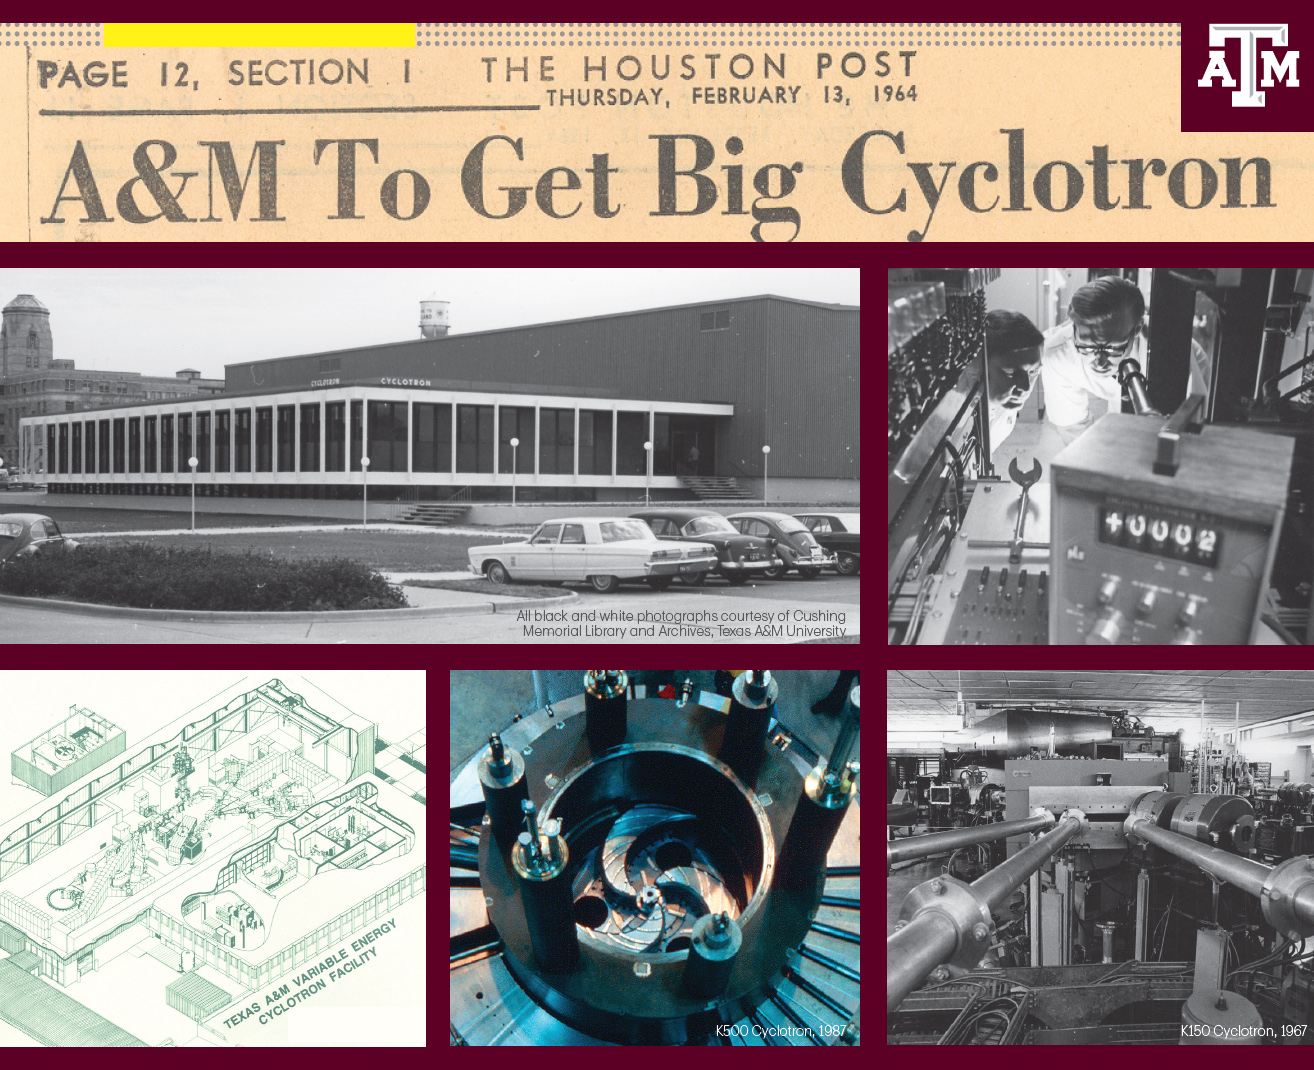 Composite image featuring a 1964 headline from the Houston Post that reads "A&amp;M To Get Big Cyclotron" along with historic photographs of the Cyclotron Institute, the K150 and K500 cyclotrons and a facility diagram